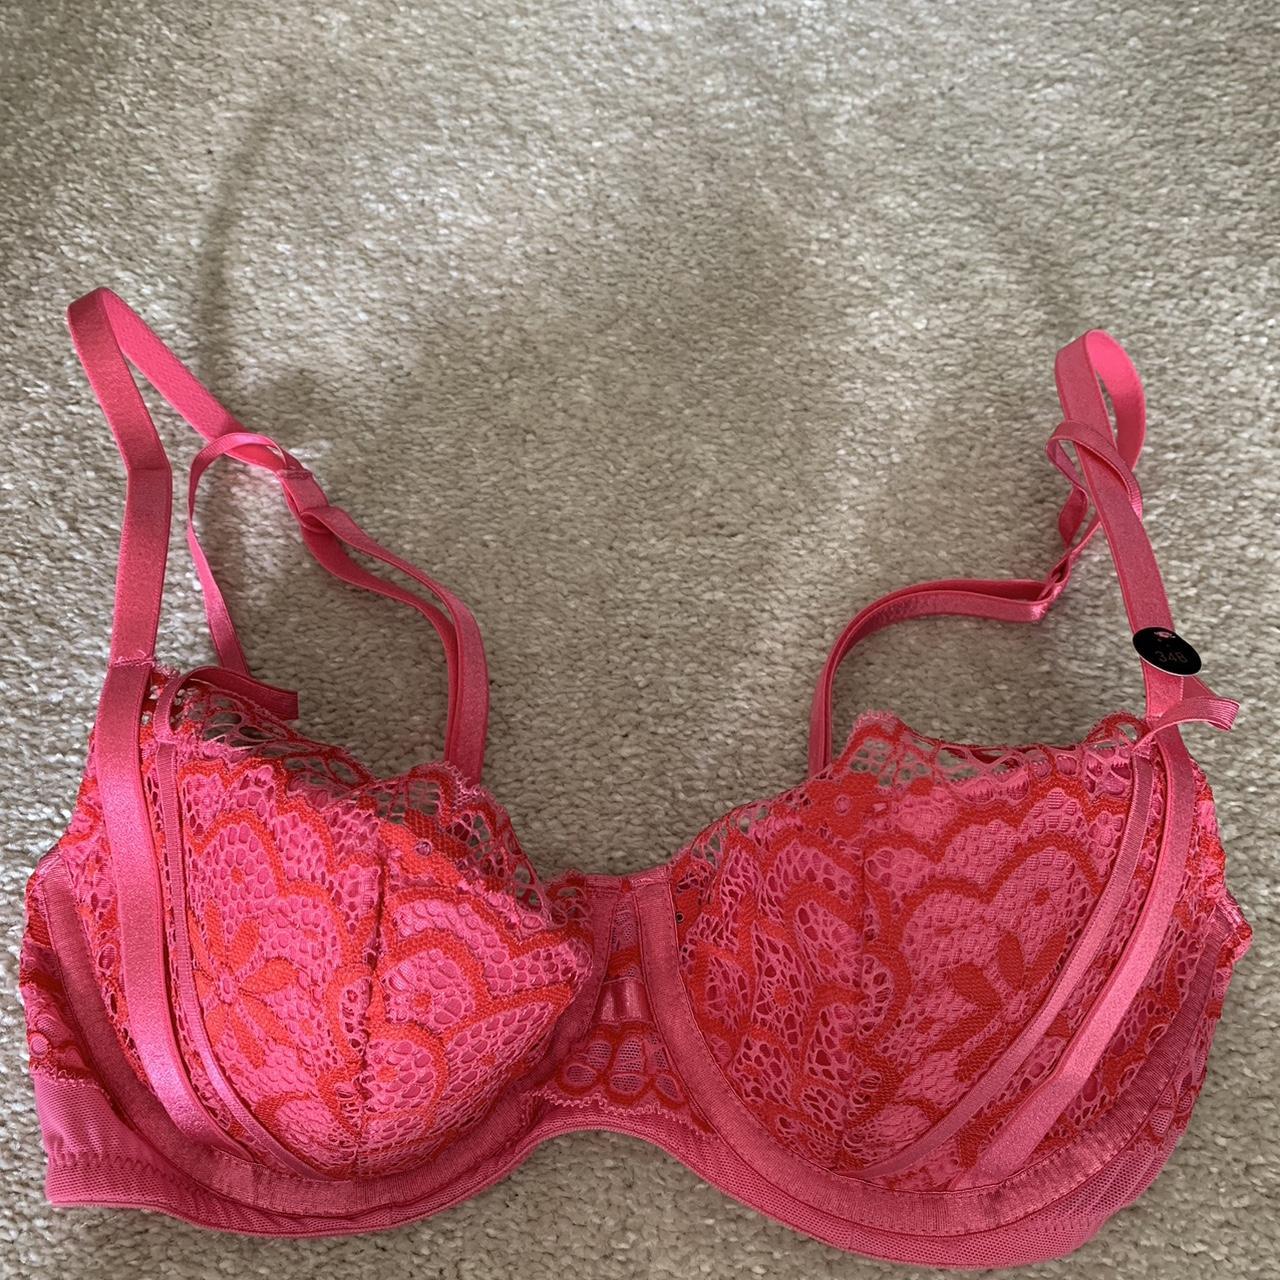 Ann Summers Electric Blue Body size UK22 cup size - Depop